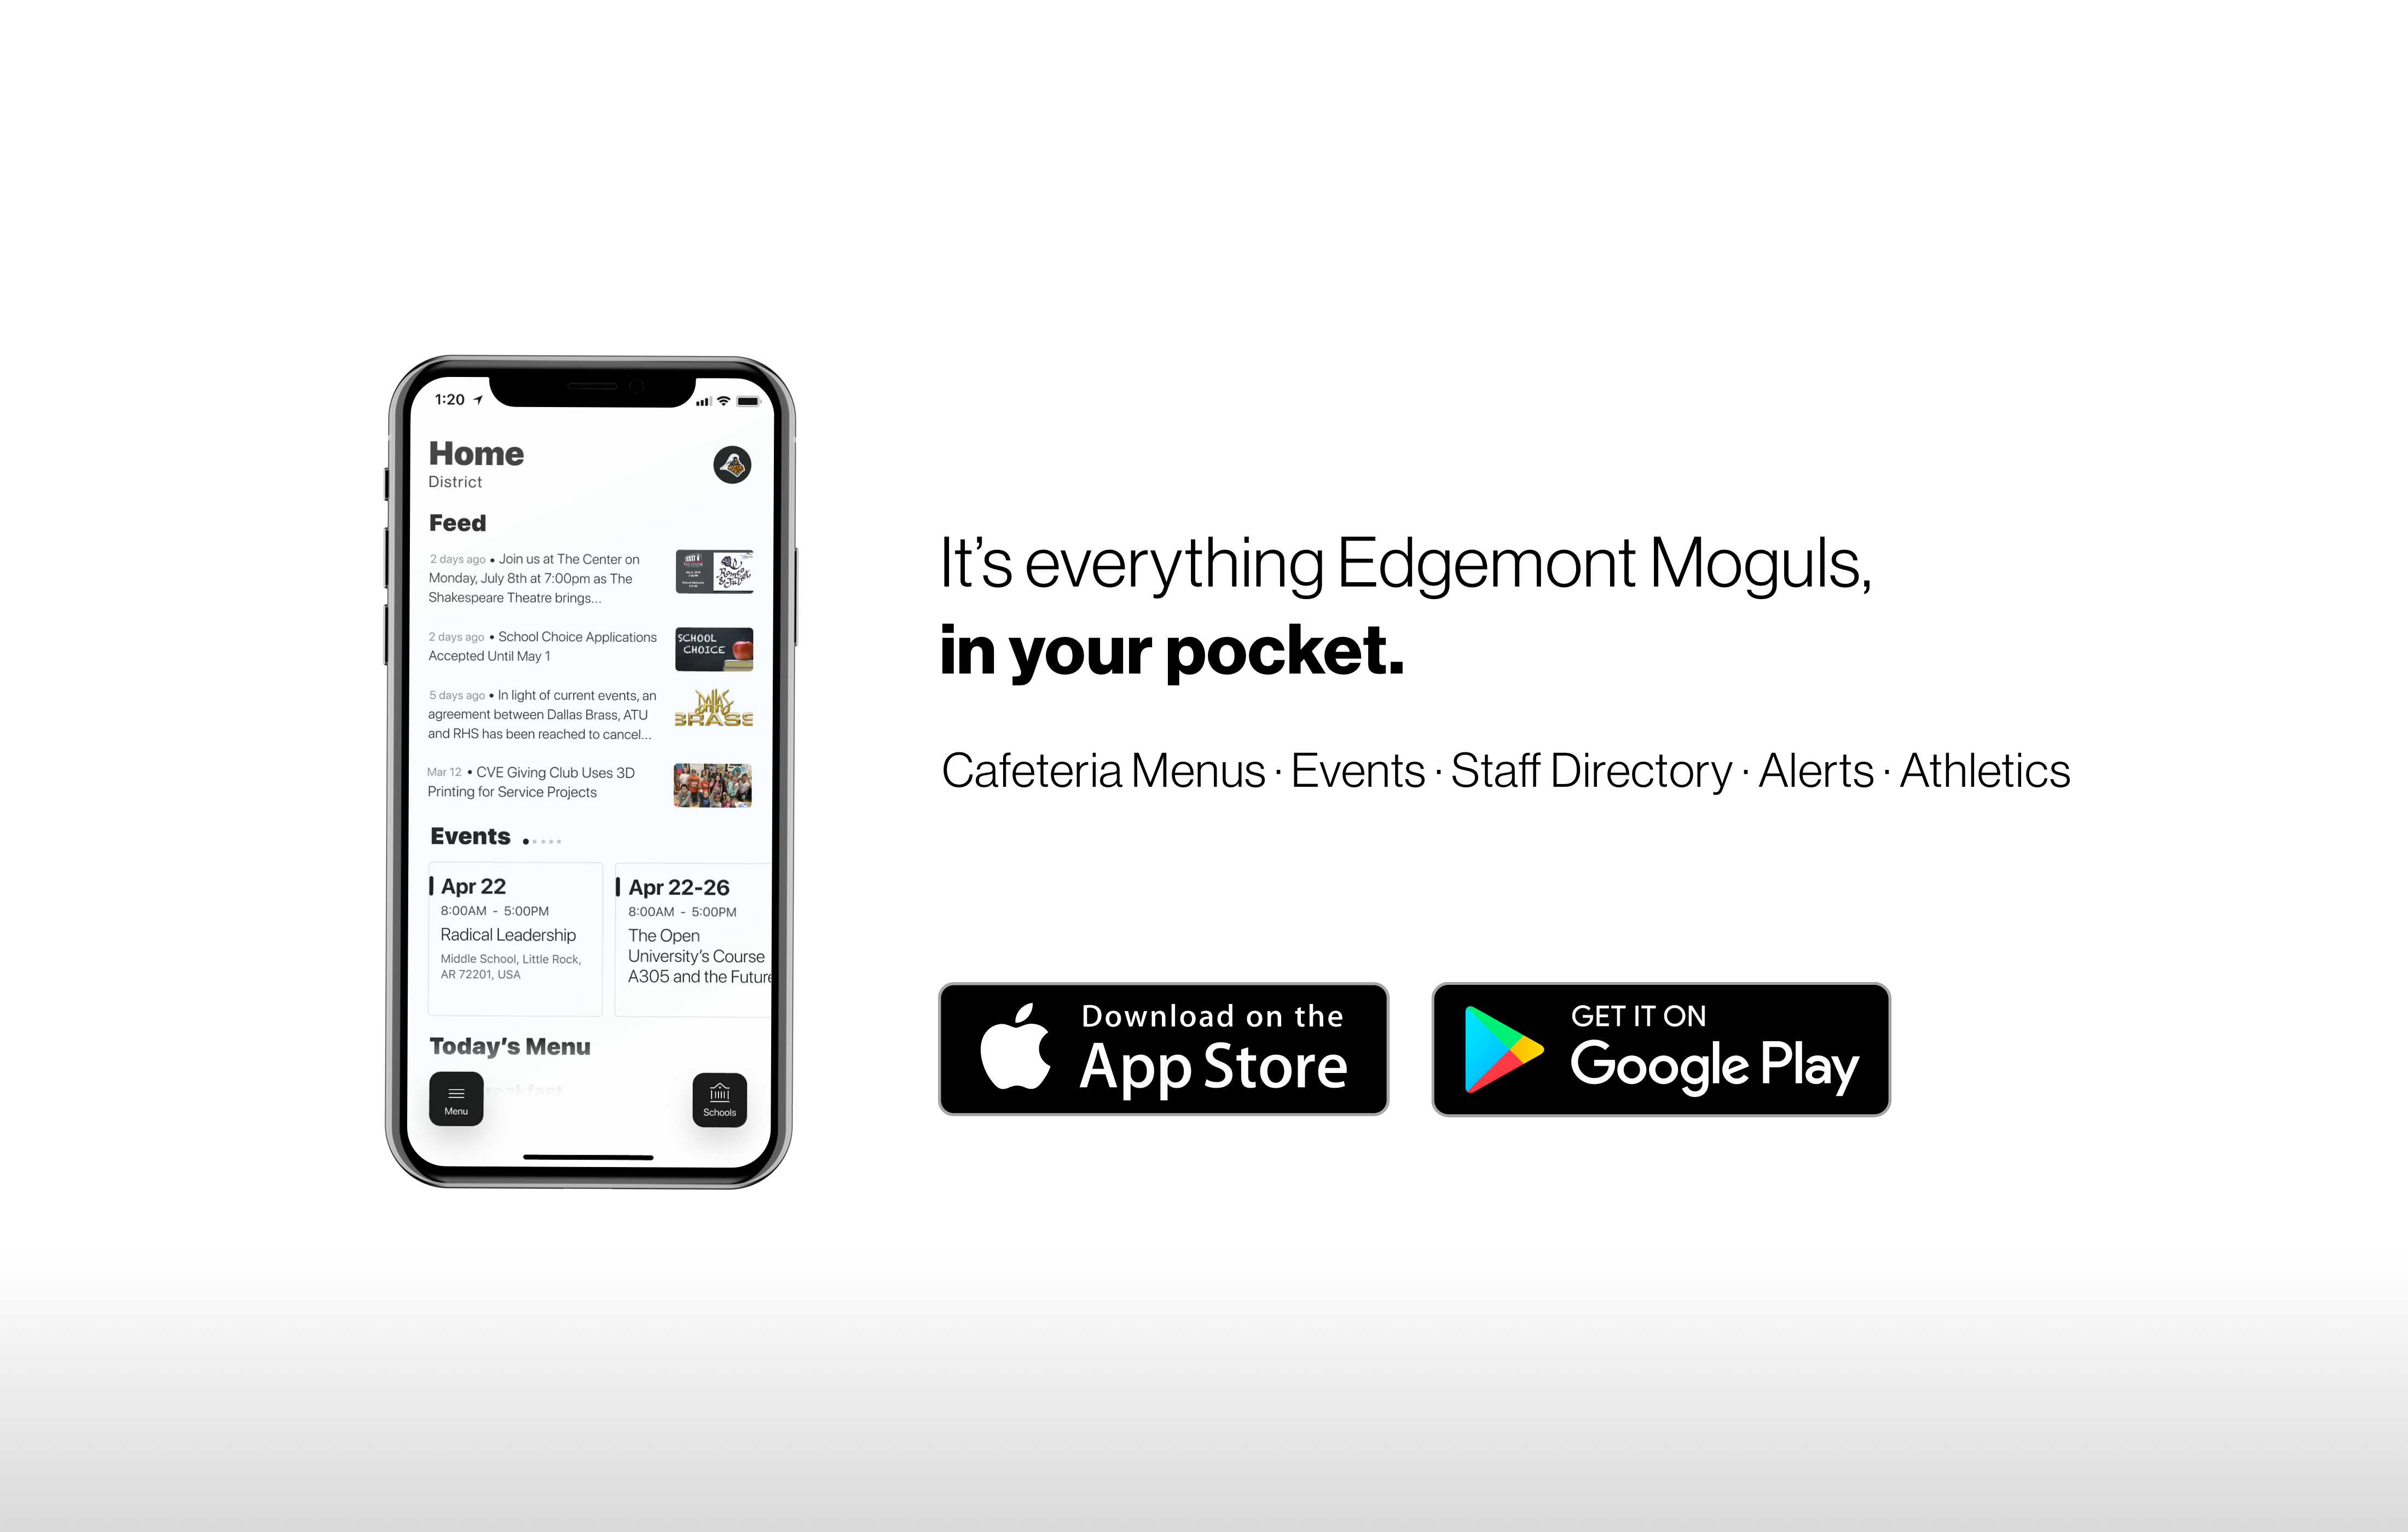 It's everything Edgemont Monguls, in your pocket!